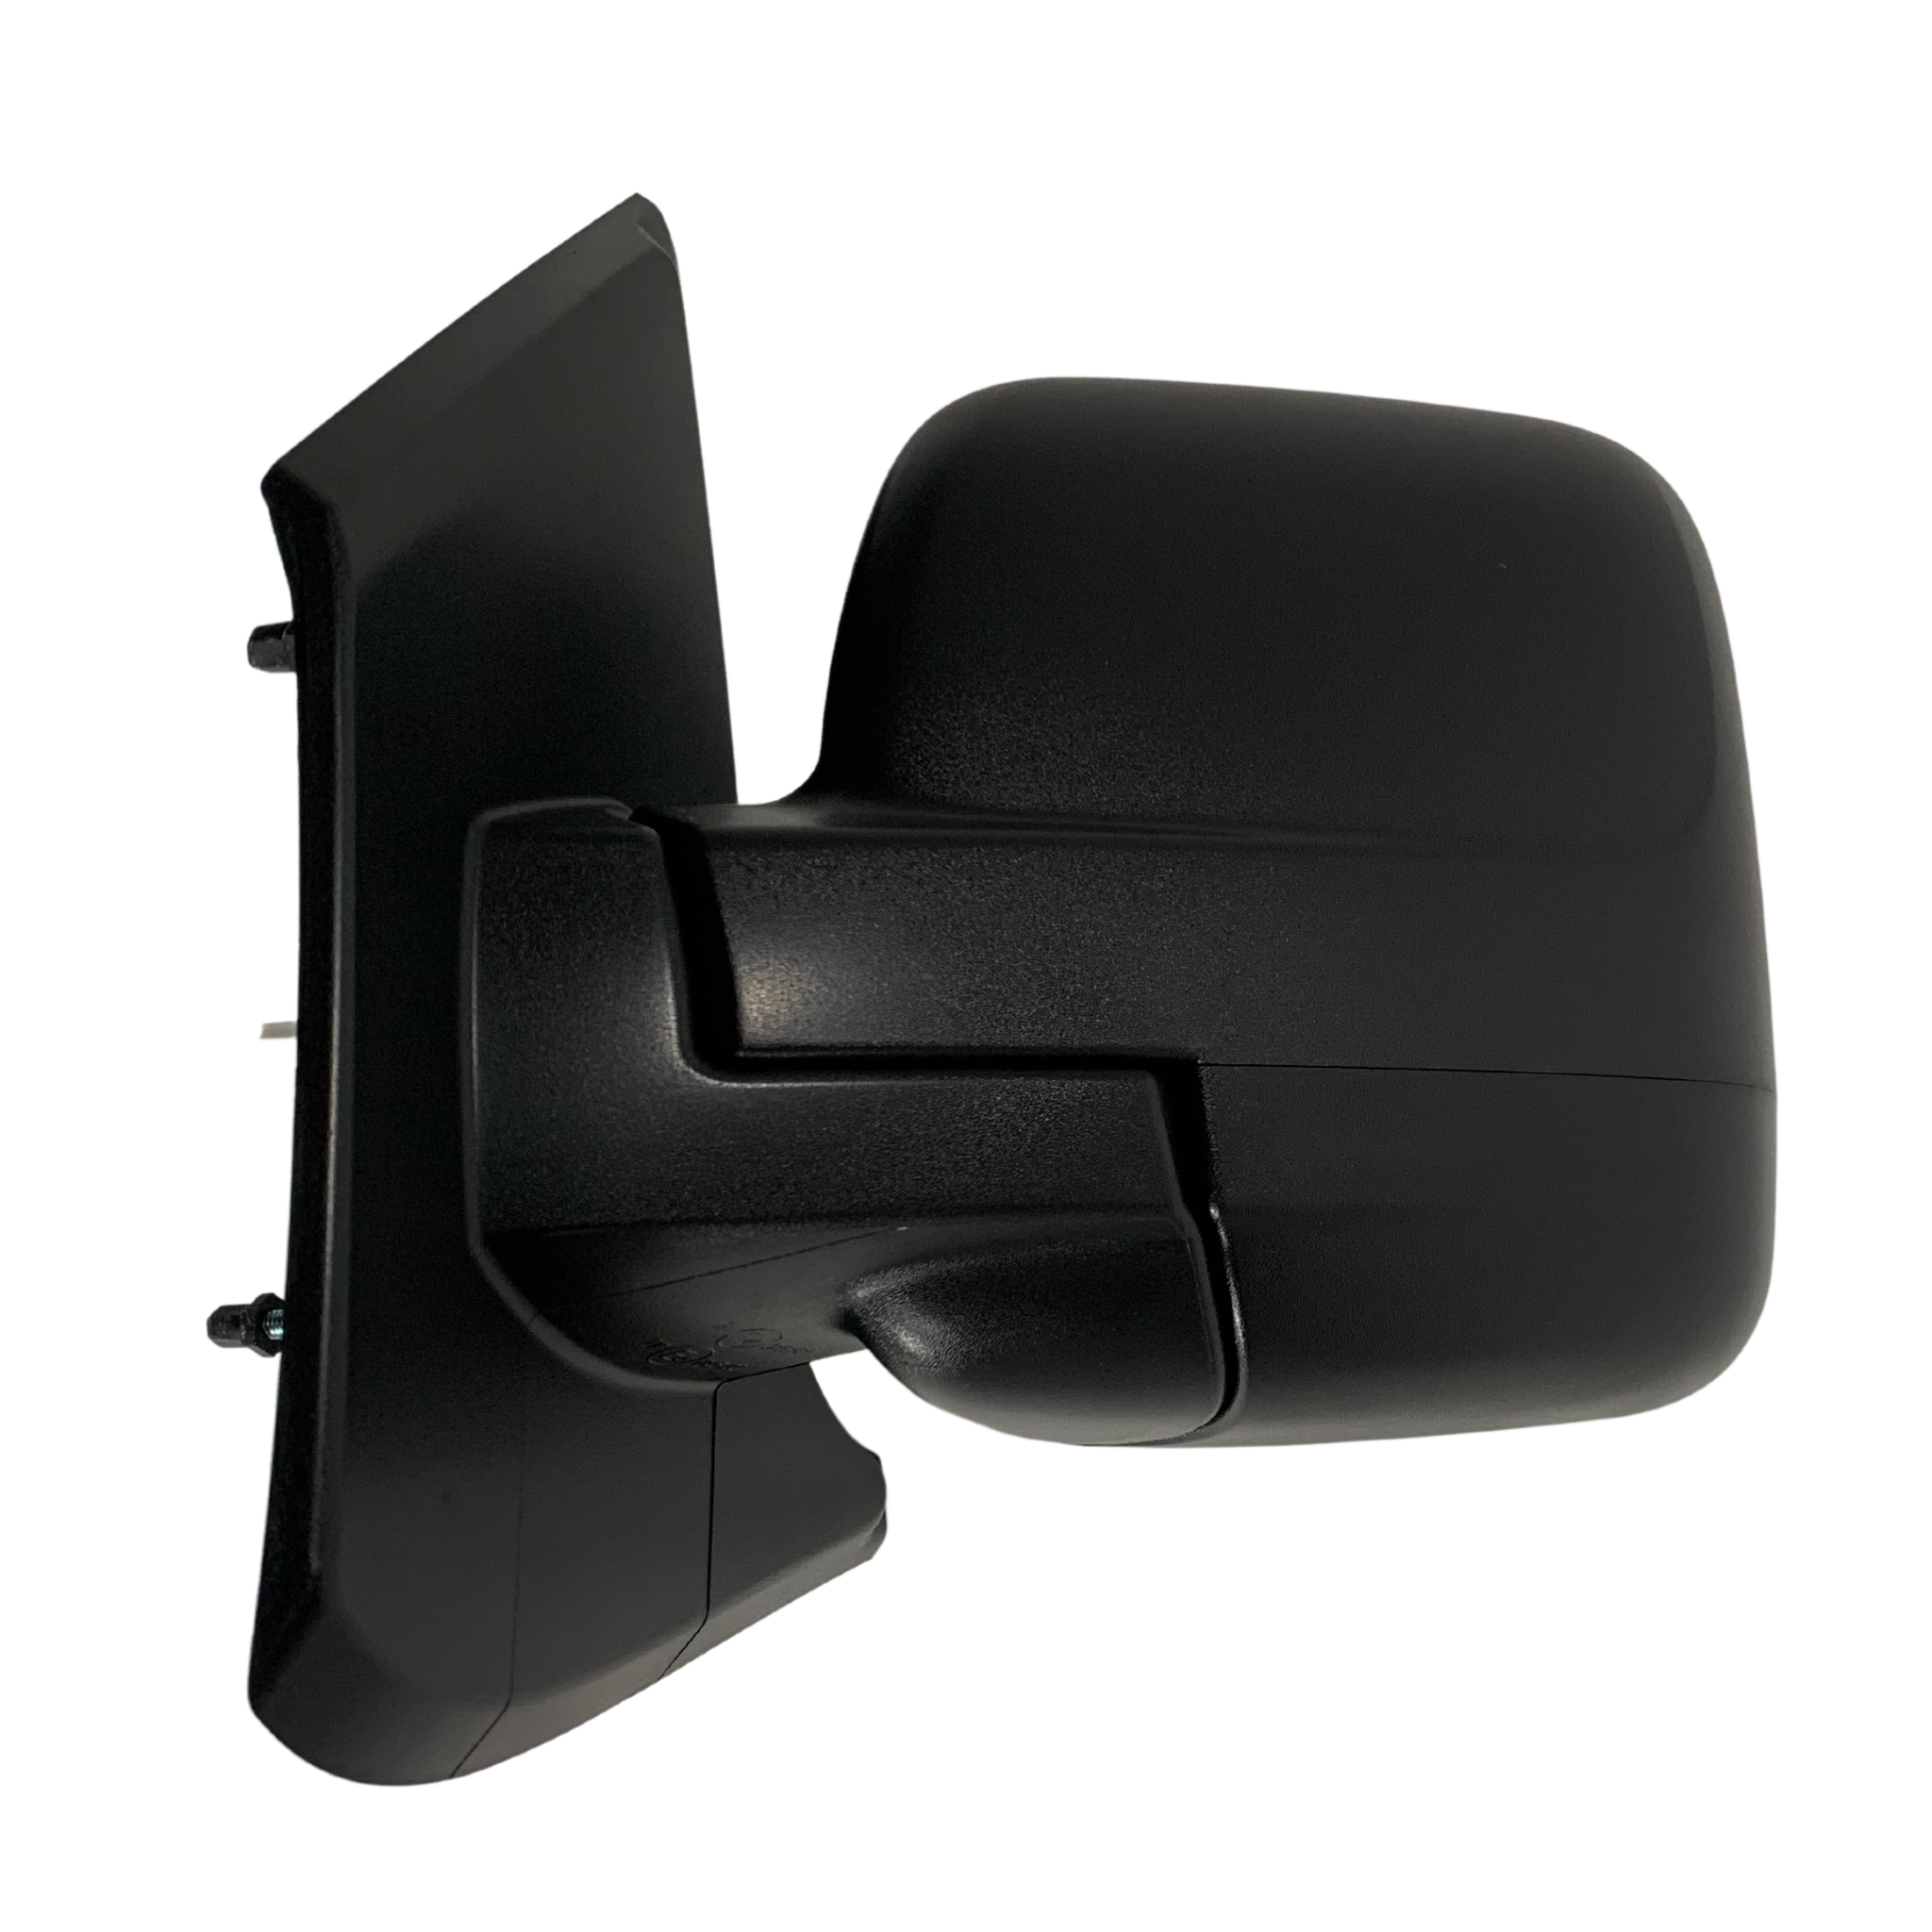 Right Door Mirror Cover - Renault Trafic for sale in Co. Cork for €18